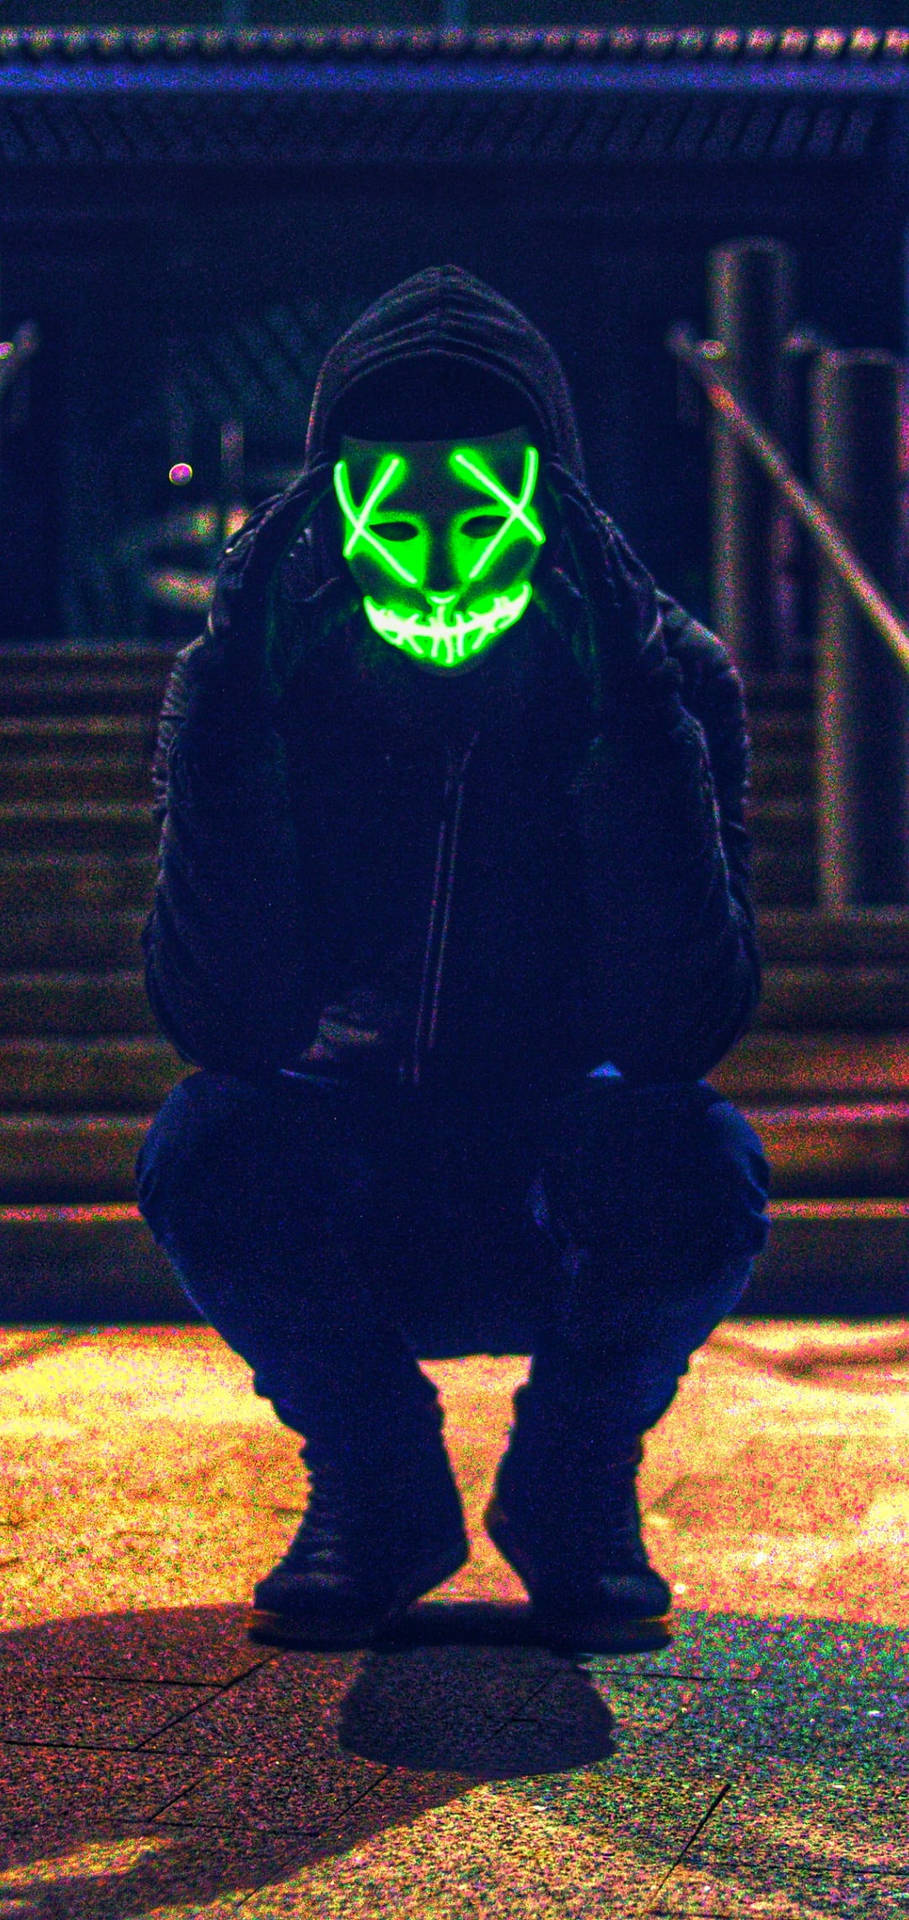 Fear Meets Mystery - A Man In A Chilling Purge Mask Crouched In Darkness